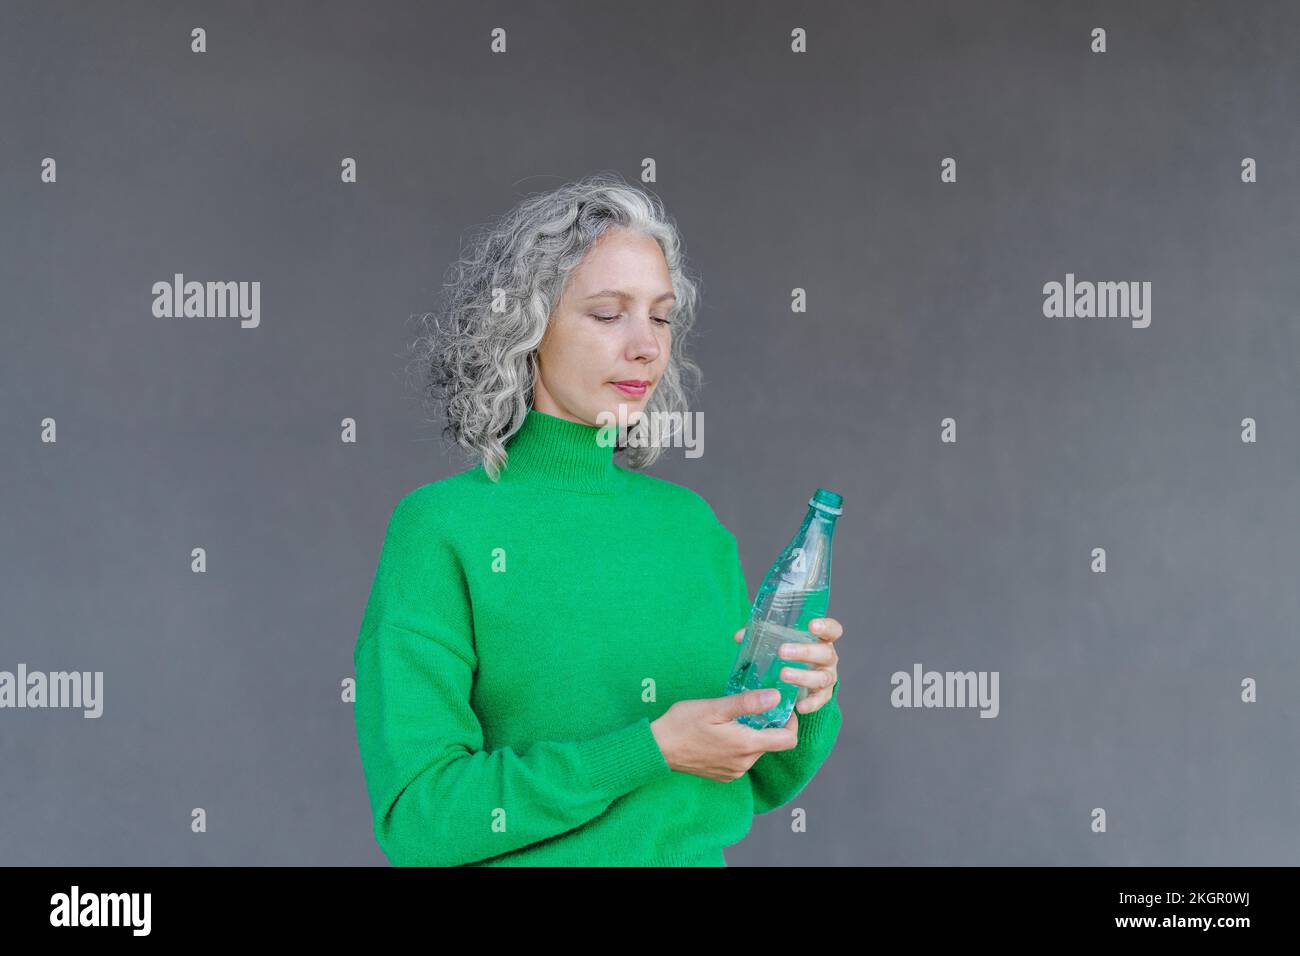 Woman with gray hair holding green water bottle in front of wall Stock Photo